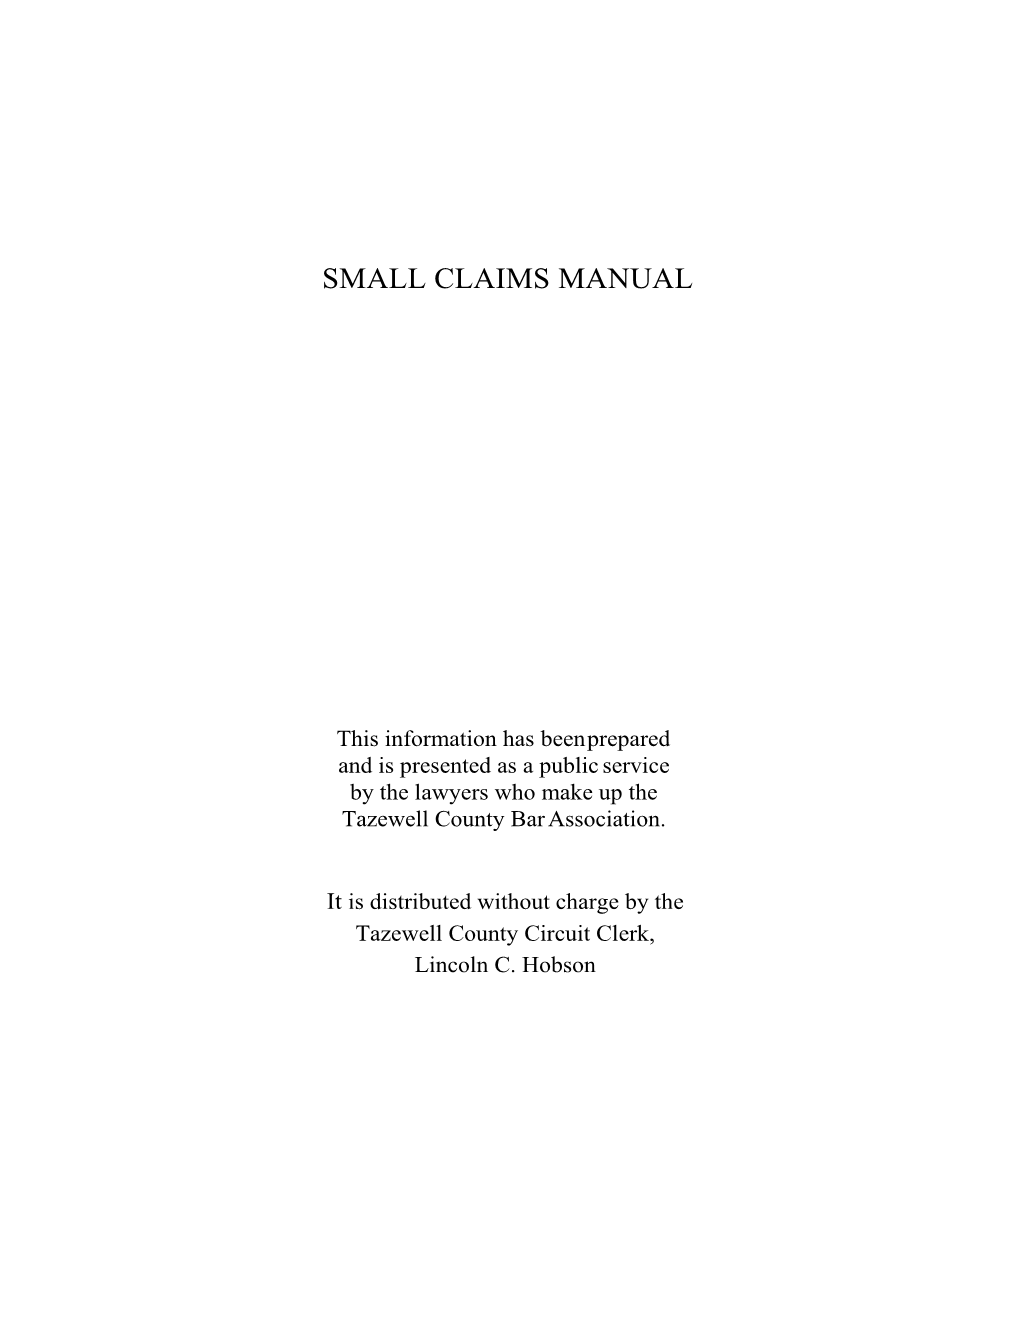 Small Claims Manual